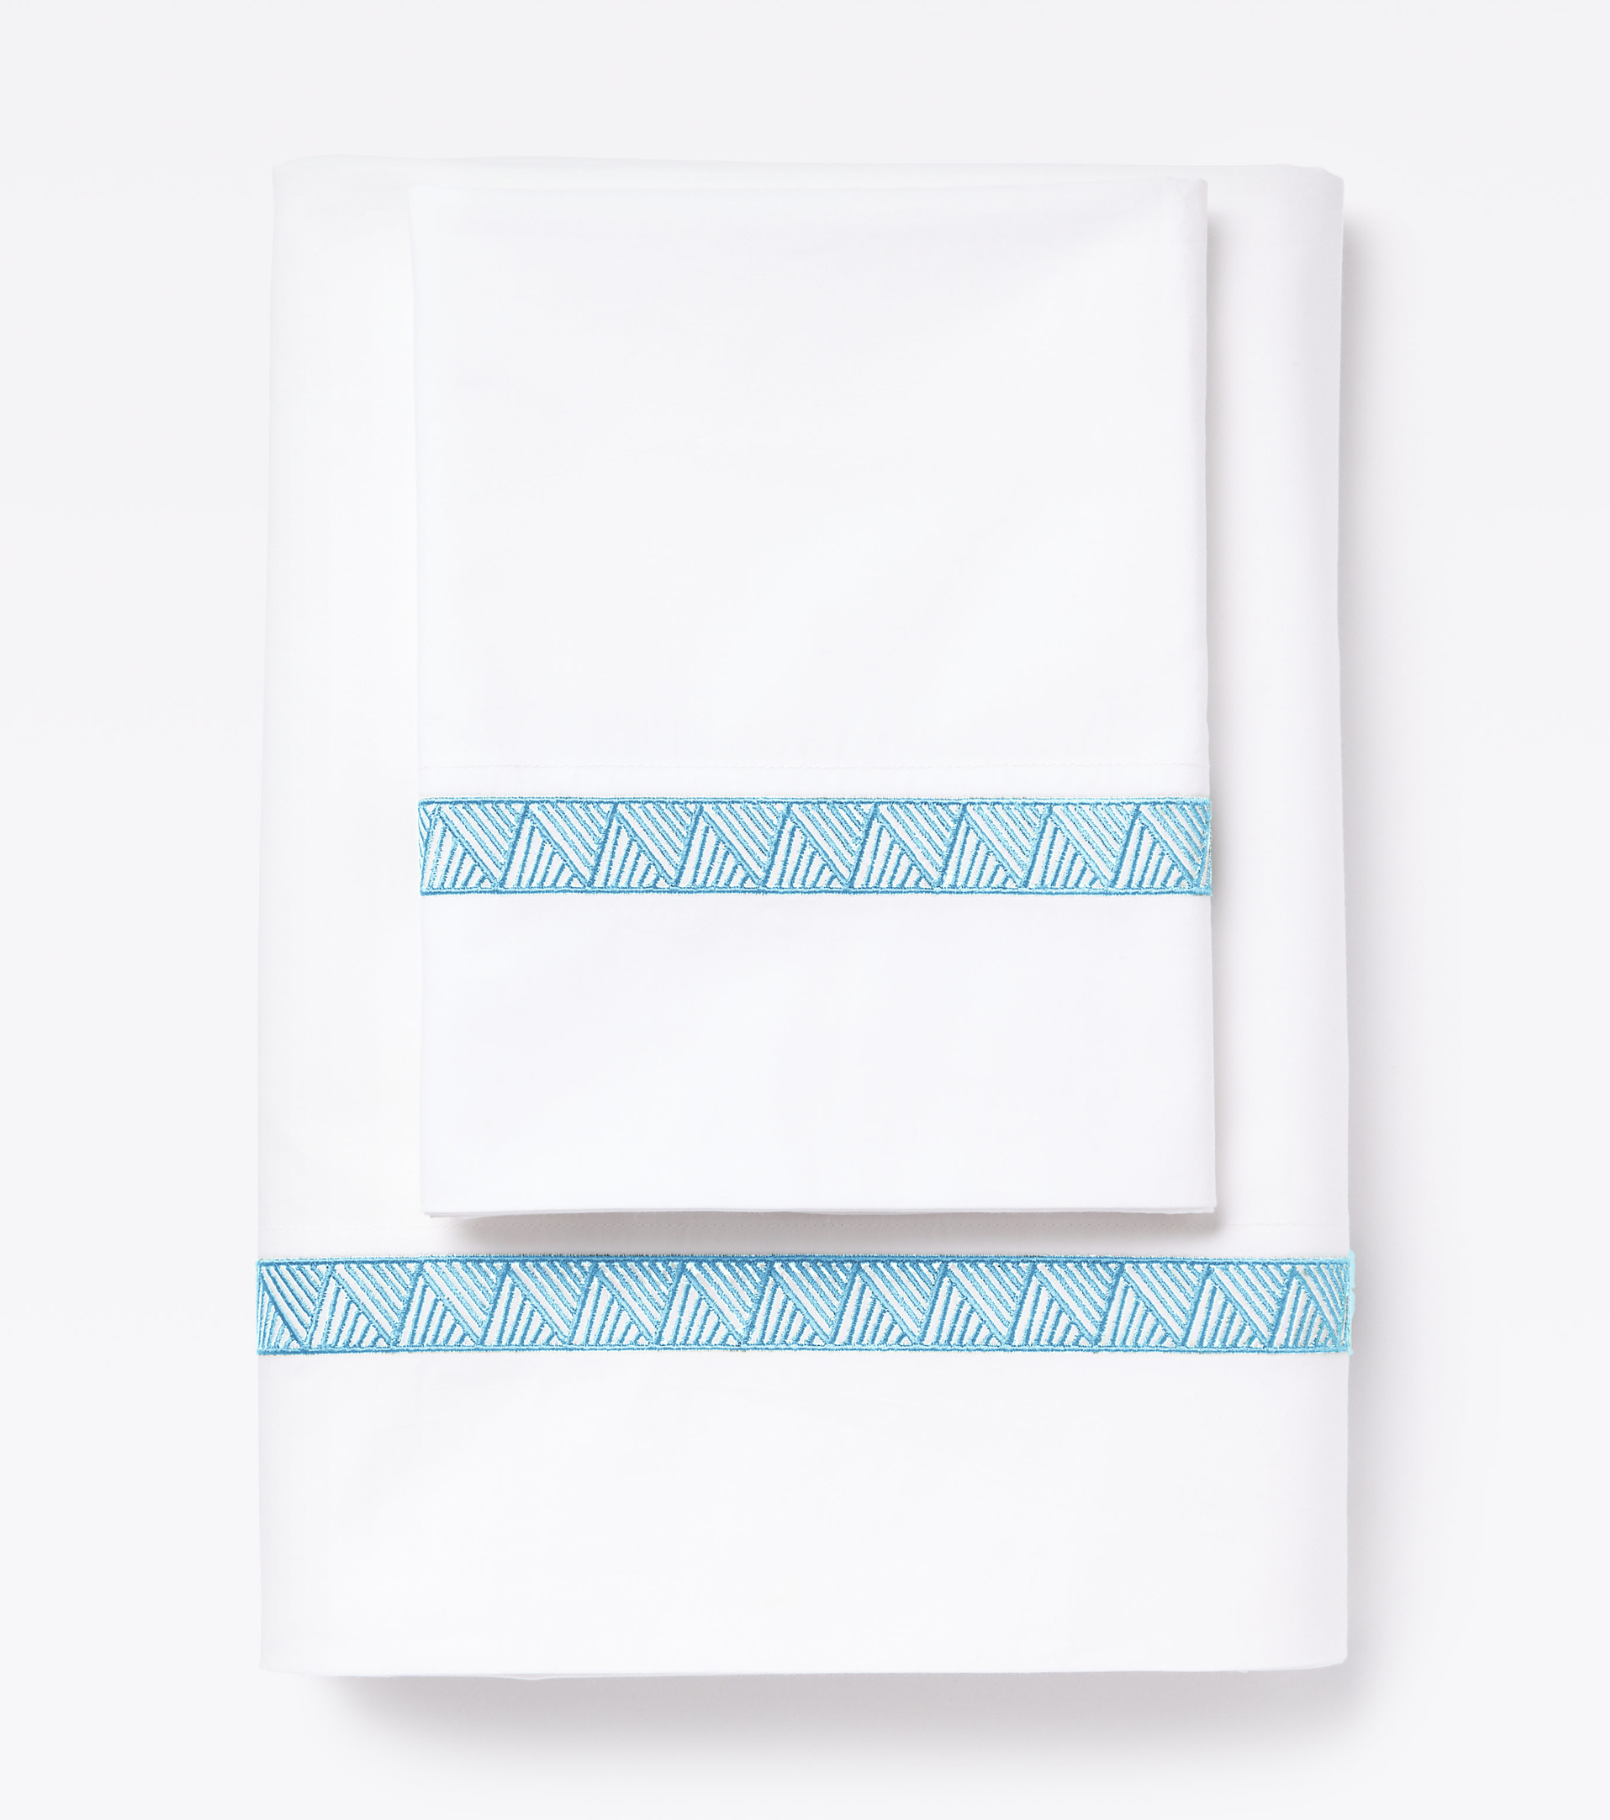 Averylily Weave Sheet Set in White with embroidered trim in Sky Blue. 510-thread count pure cotton percale.